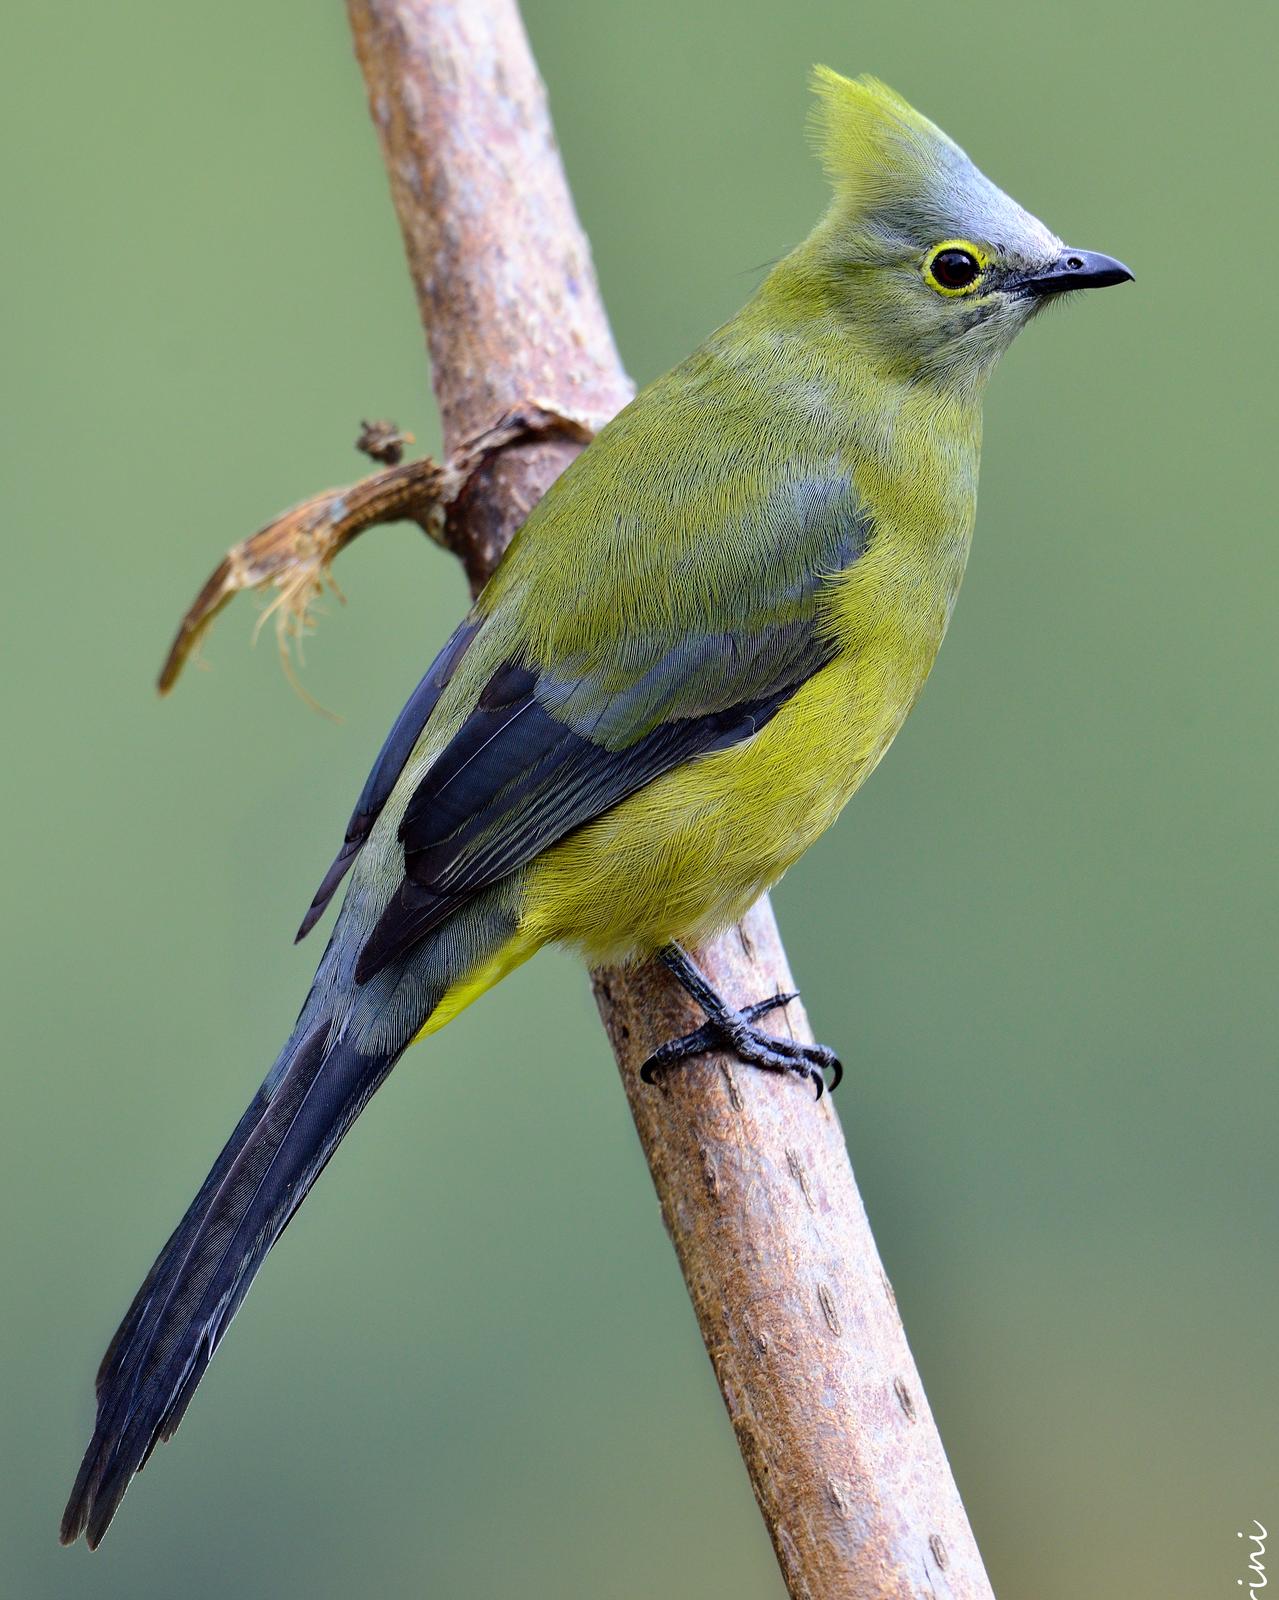 Long-tailed Silky-flycatcher Photo by Laurence Pellegrini